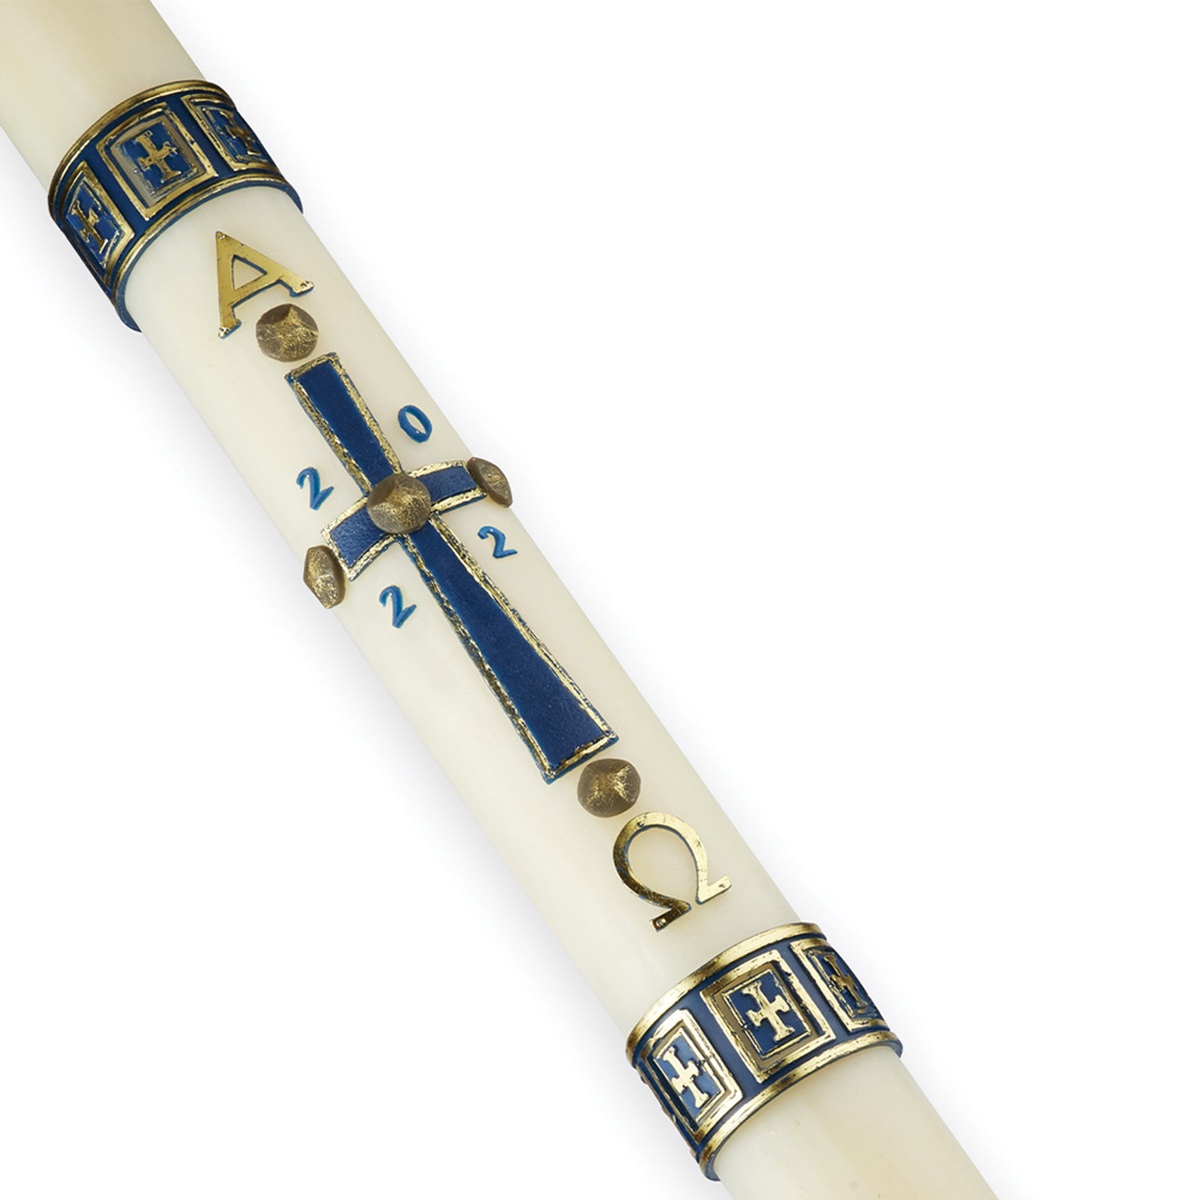 Root Paschal Candle Proclaim the Gospel 2 1/2” x 44”